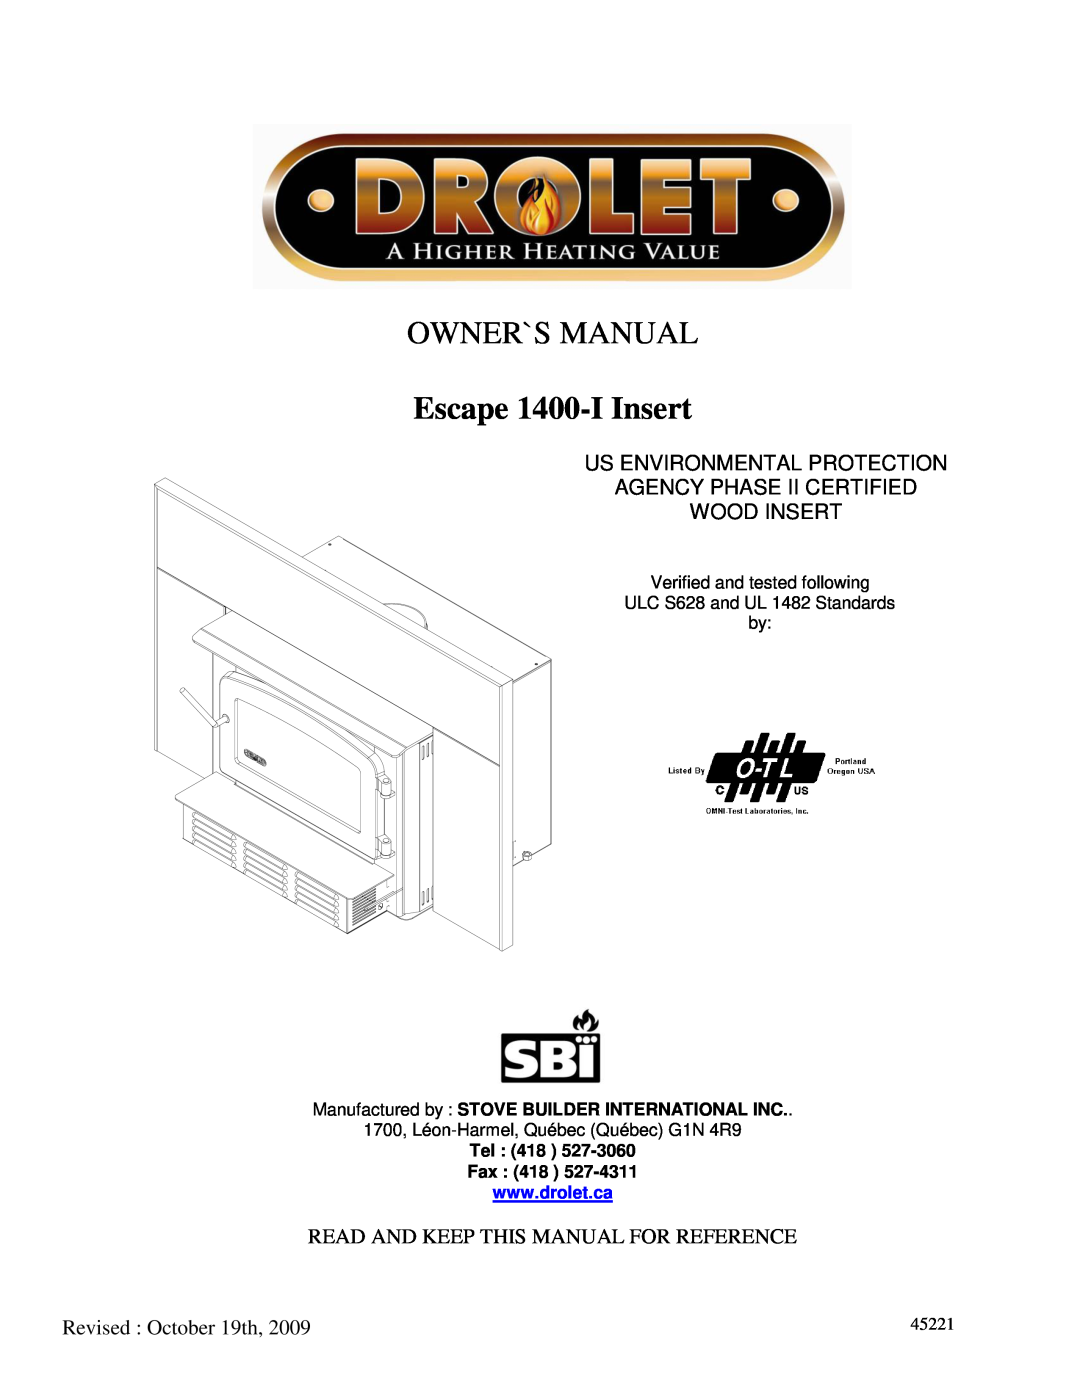 Drolet 45221 owner manual Escape 1400-IInsert, Us Environmental Protection, Agency Phase Ii Certified Wood Insert 